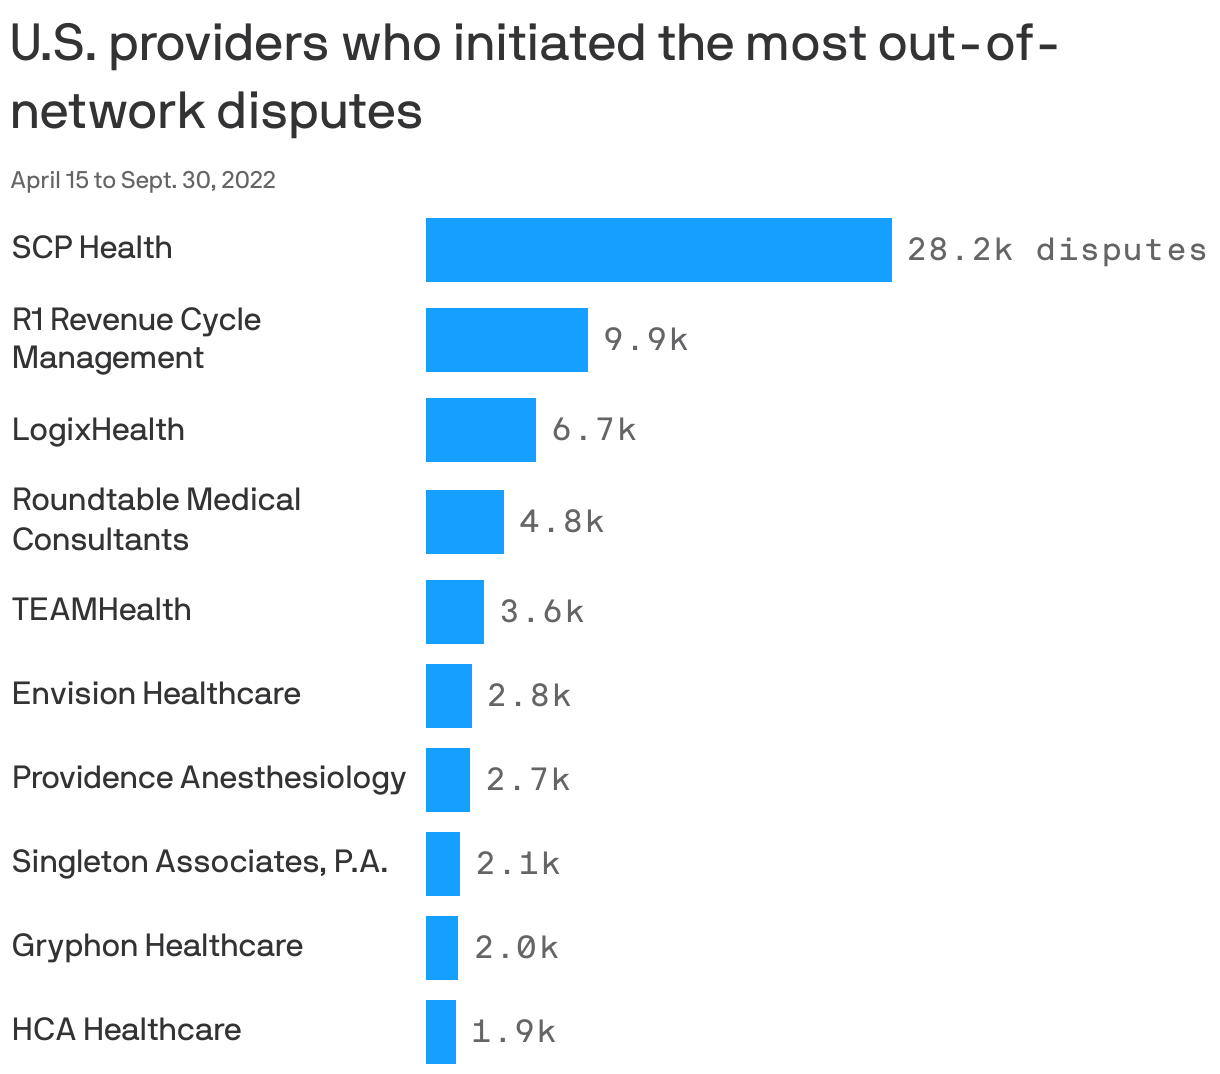 U.S. providers who initiated the most out-of-network disputes